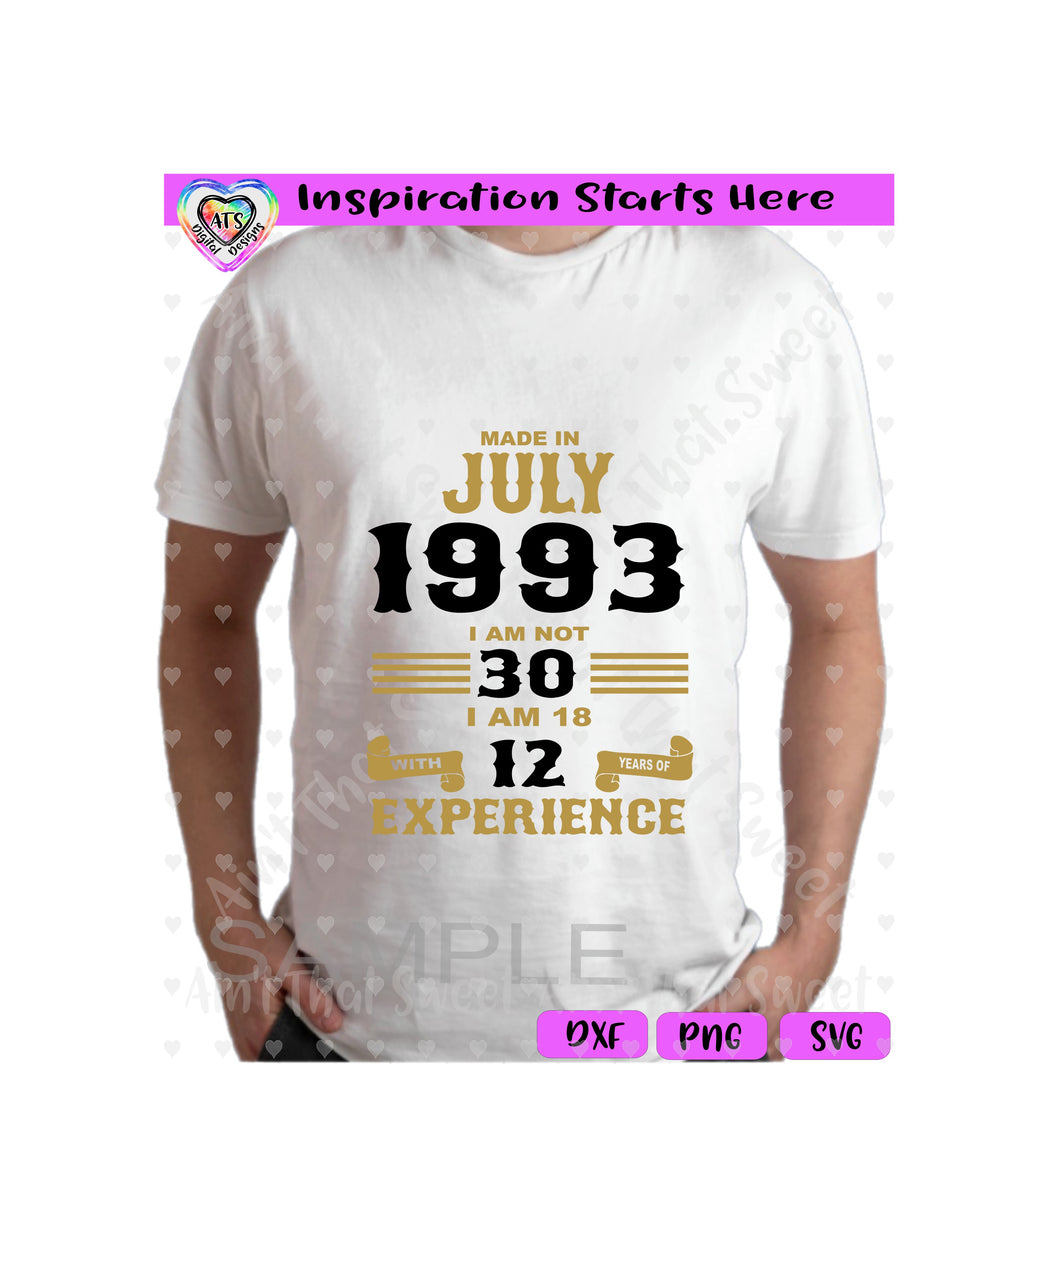 Made in July 1993 | I Am Not 30 | I Am 18 with 12 Years Of Experience (Based on 2023) | Transparent PNG SVG DXF - Silhouette, Cricut, ScanNCut